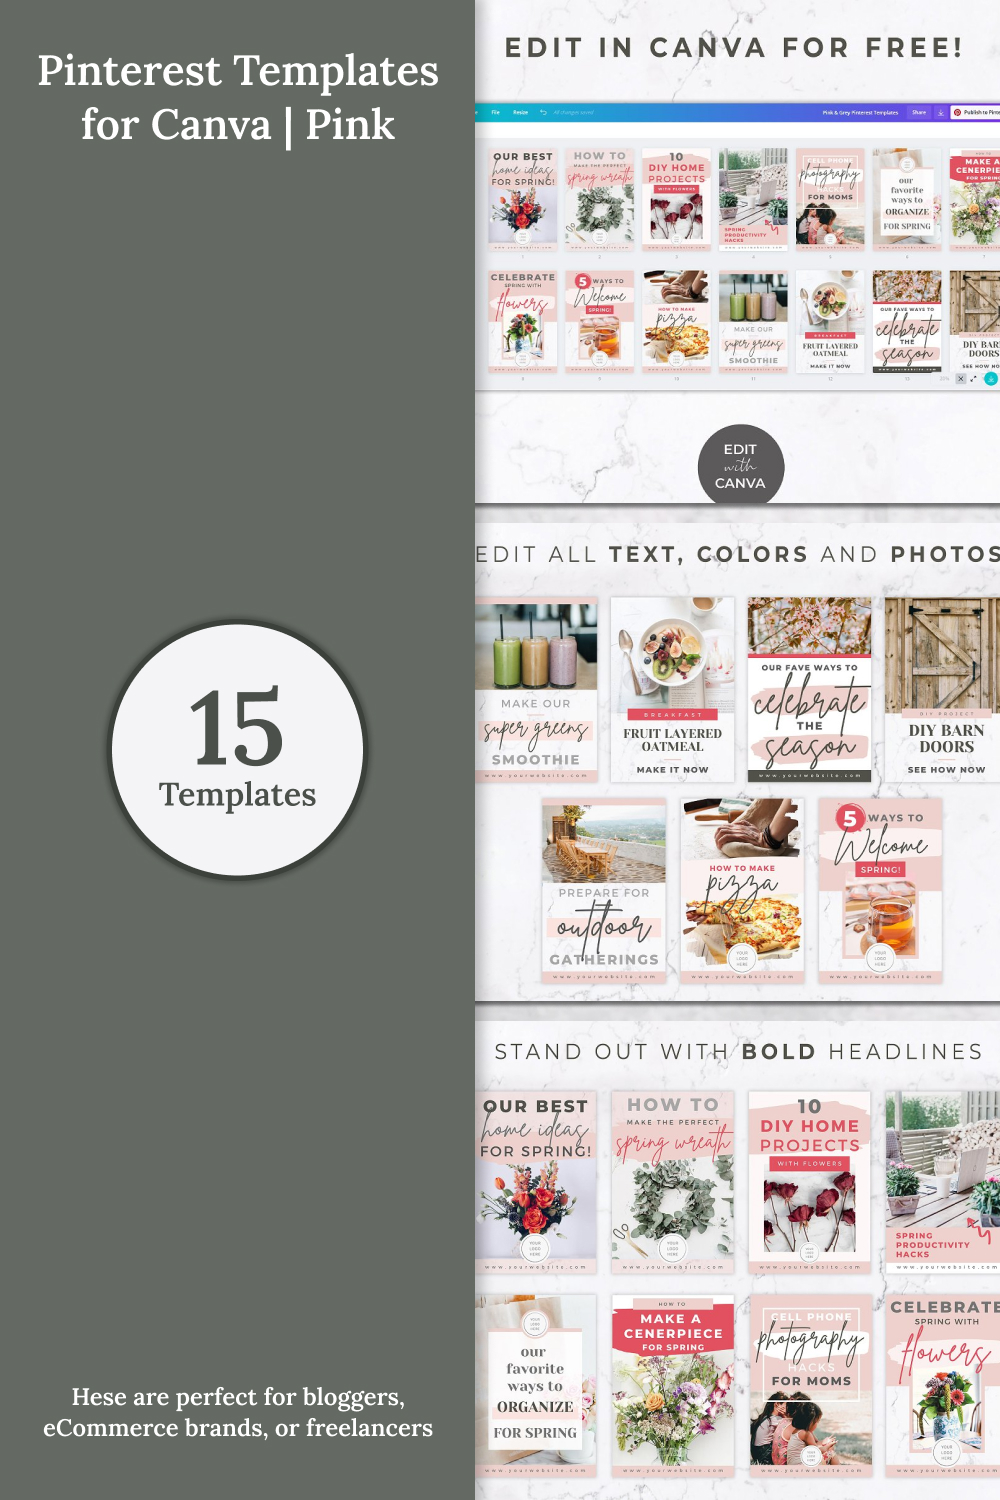 Pinterest of templates for canva pink.